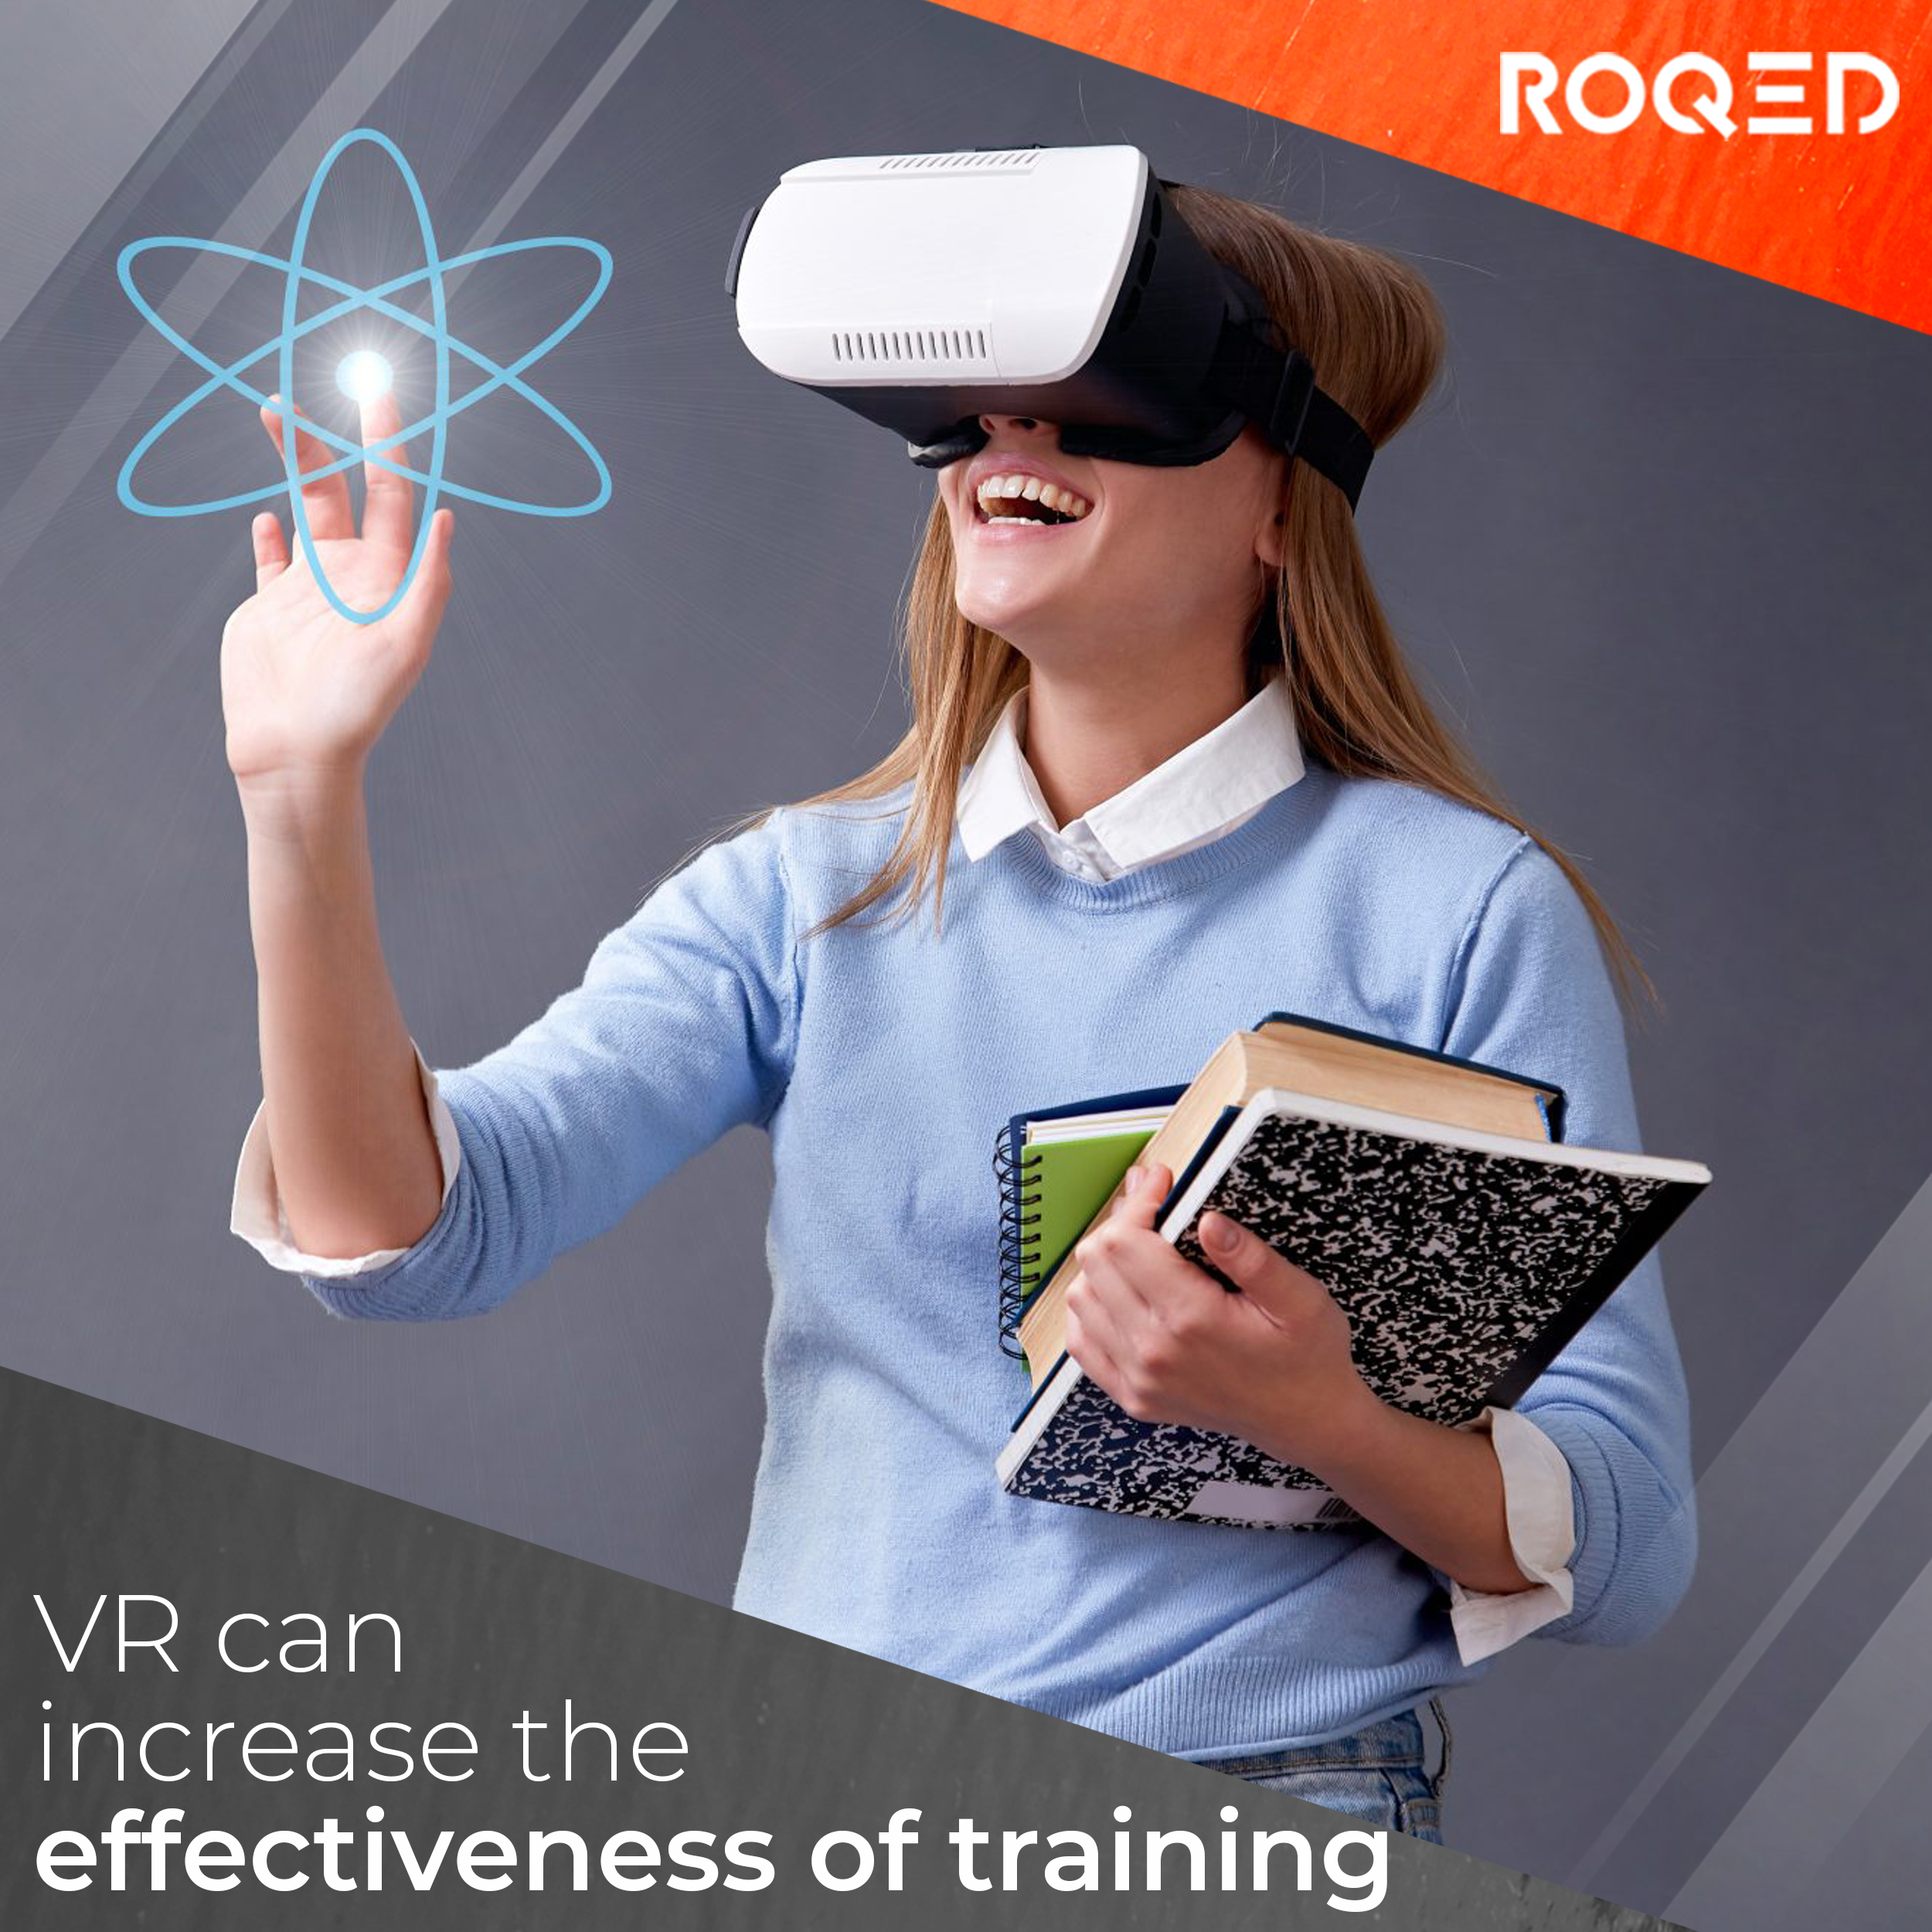 VR can increase the effectiveness of training.